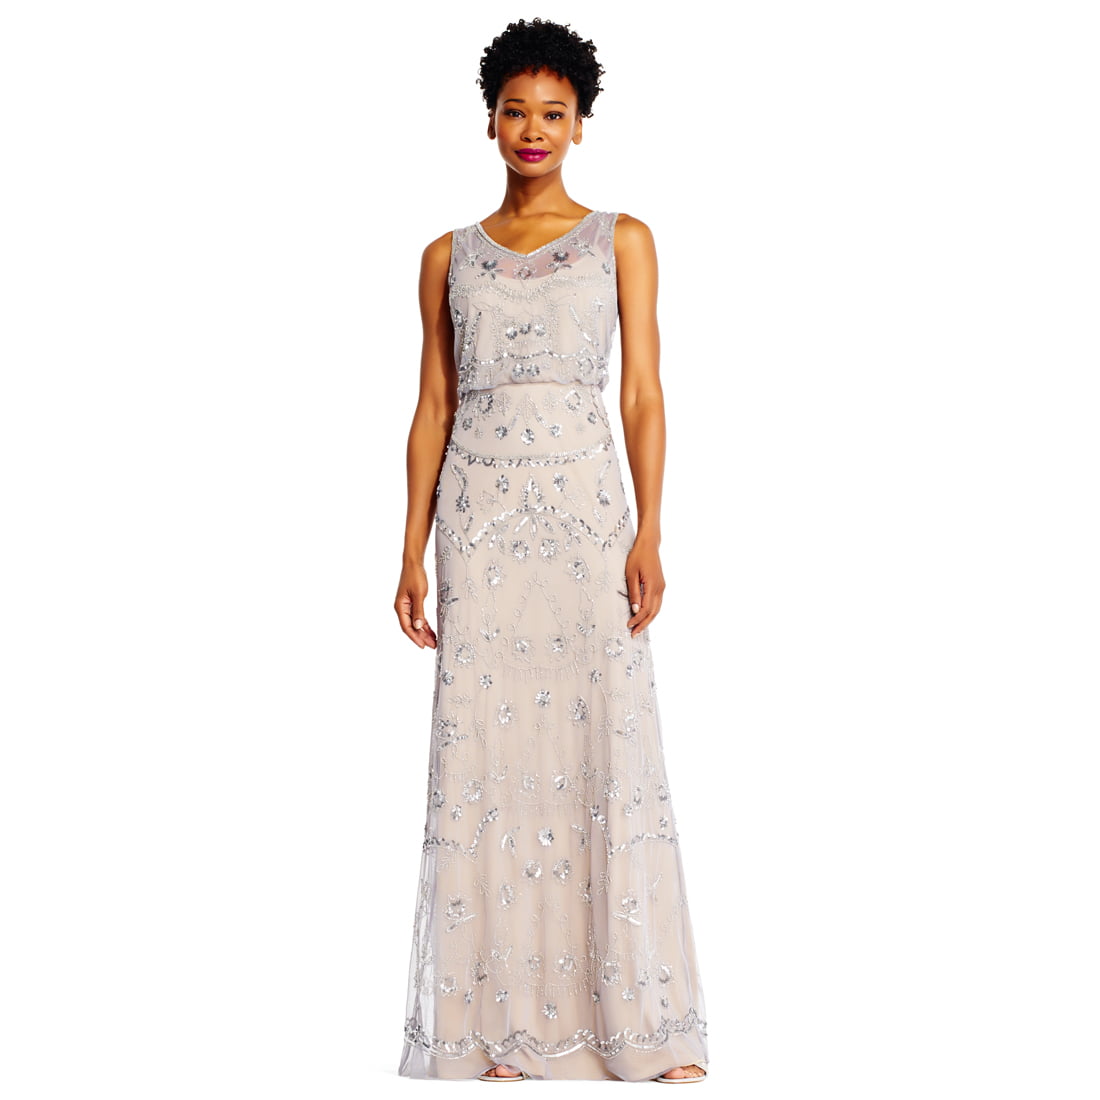 Kirsten Hand Beaded Blouson Gown by Adrianna Papell  Blush  Mothers Only